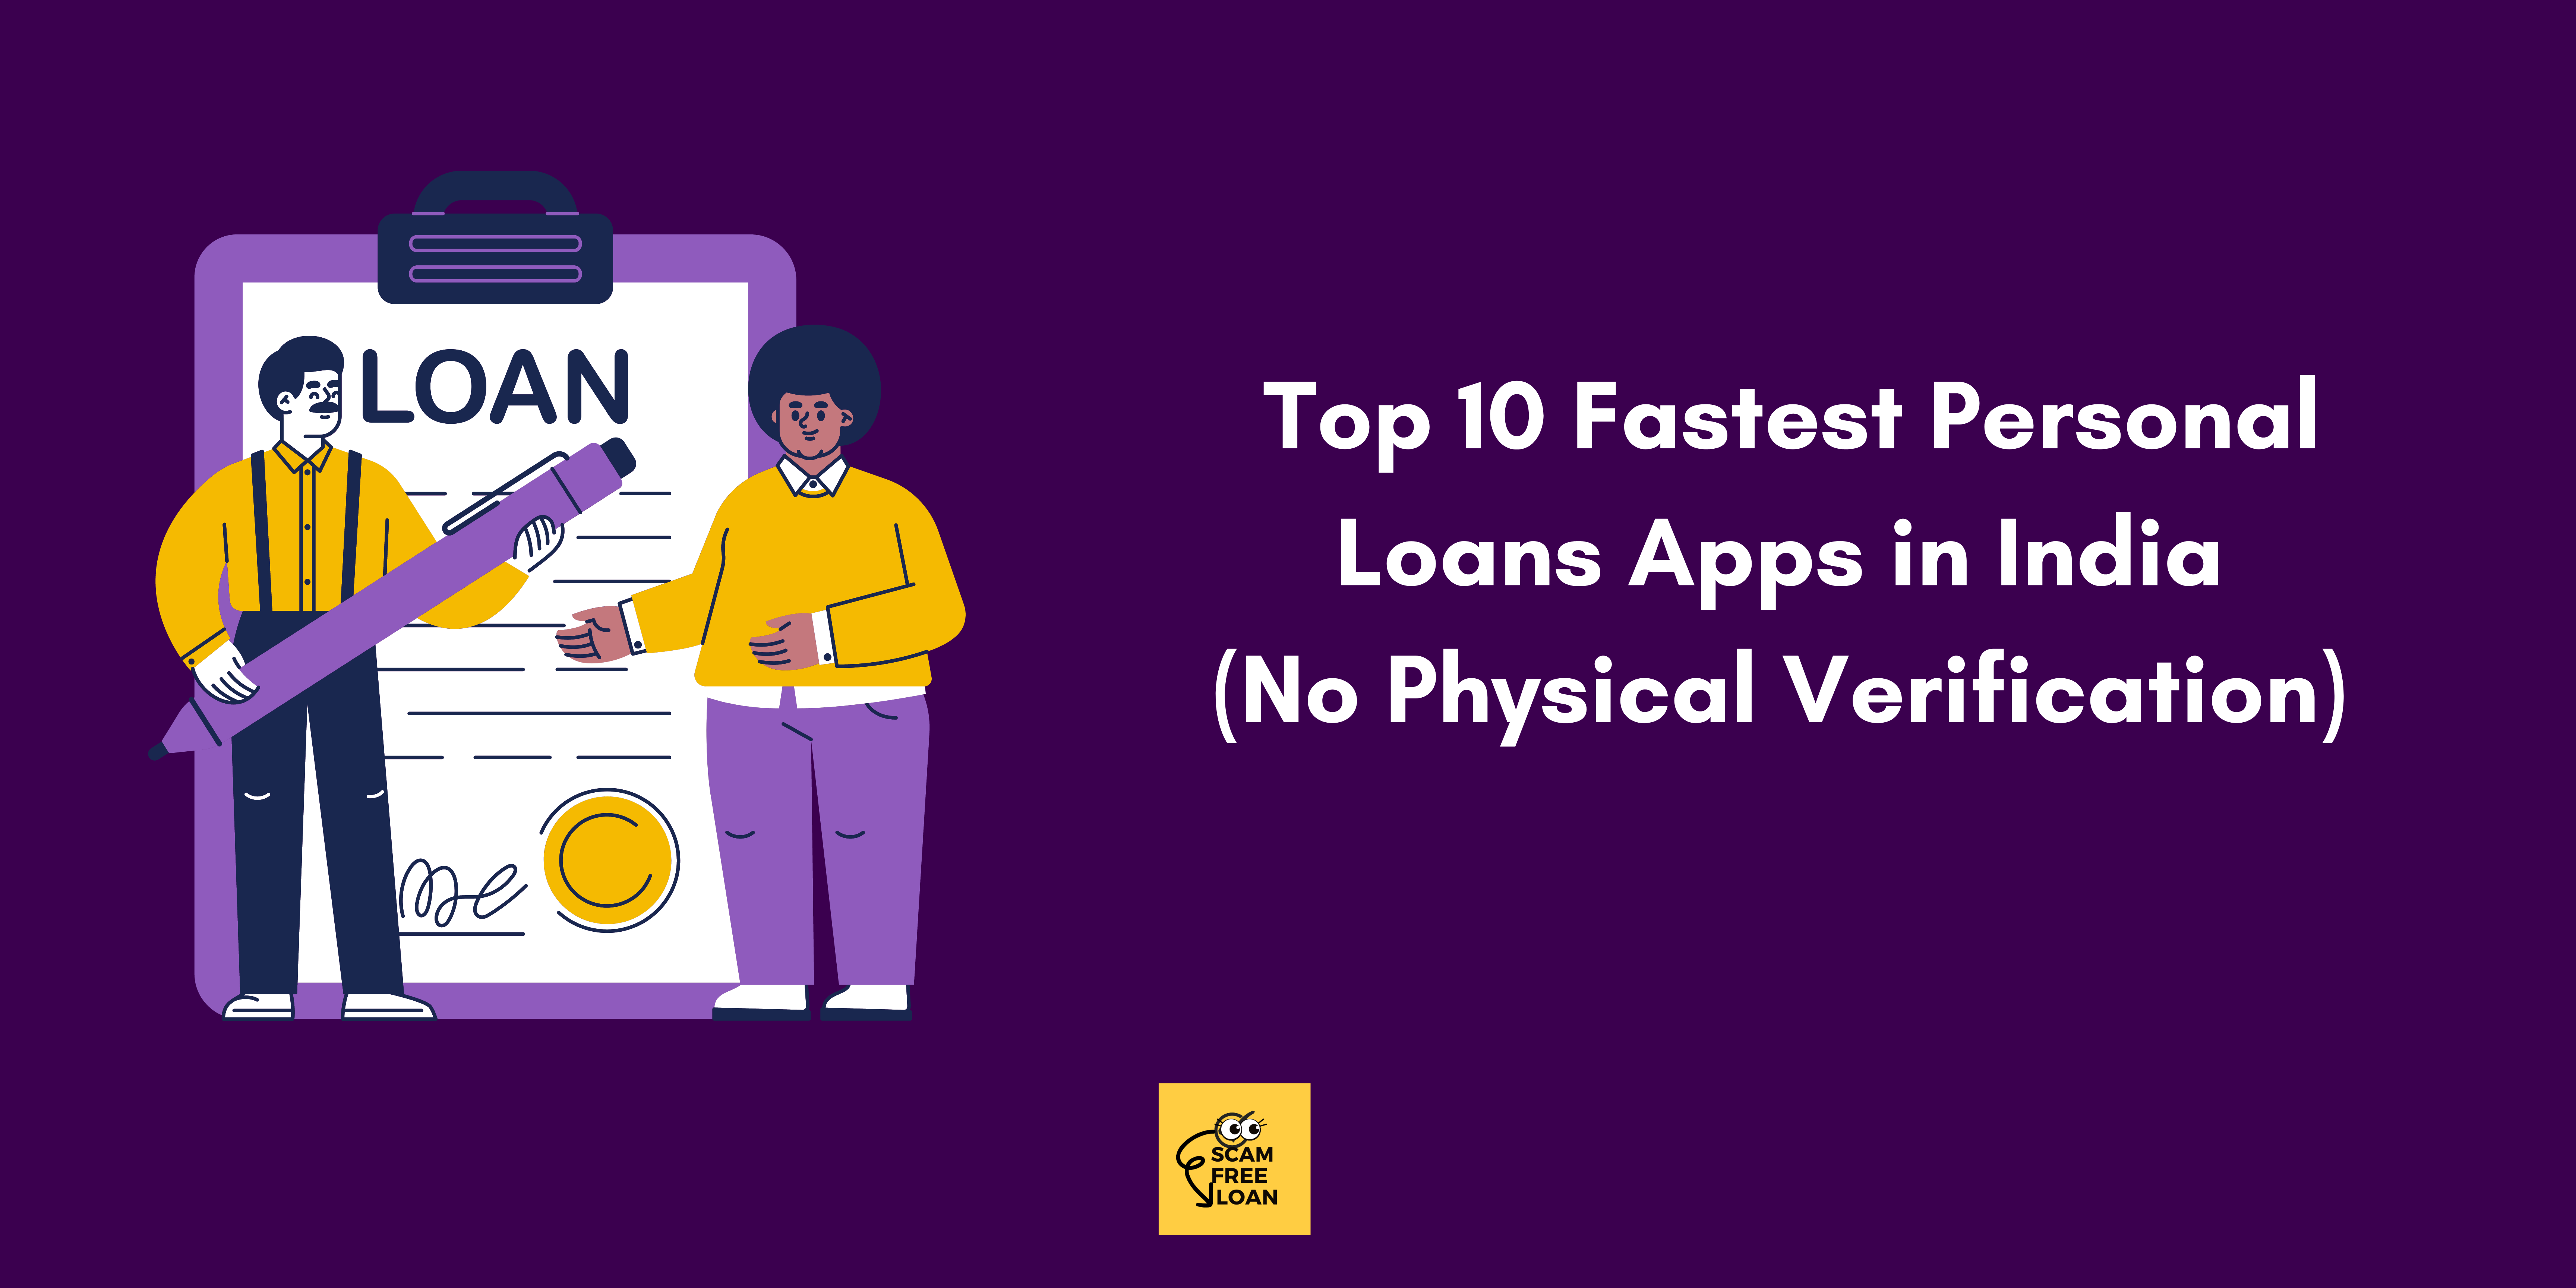 Top 10 Fastest Personal Loans Apps in India (No Physical Verification)